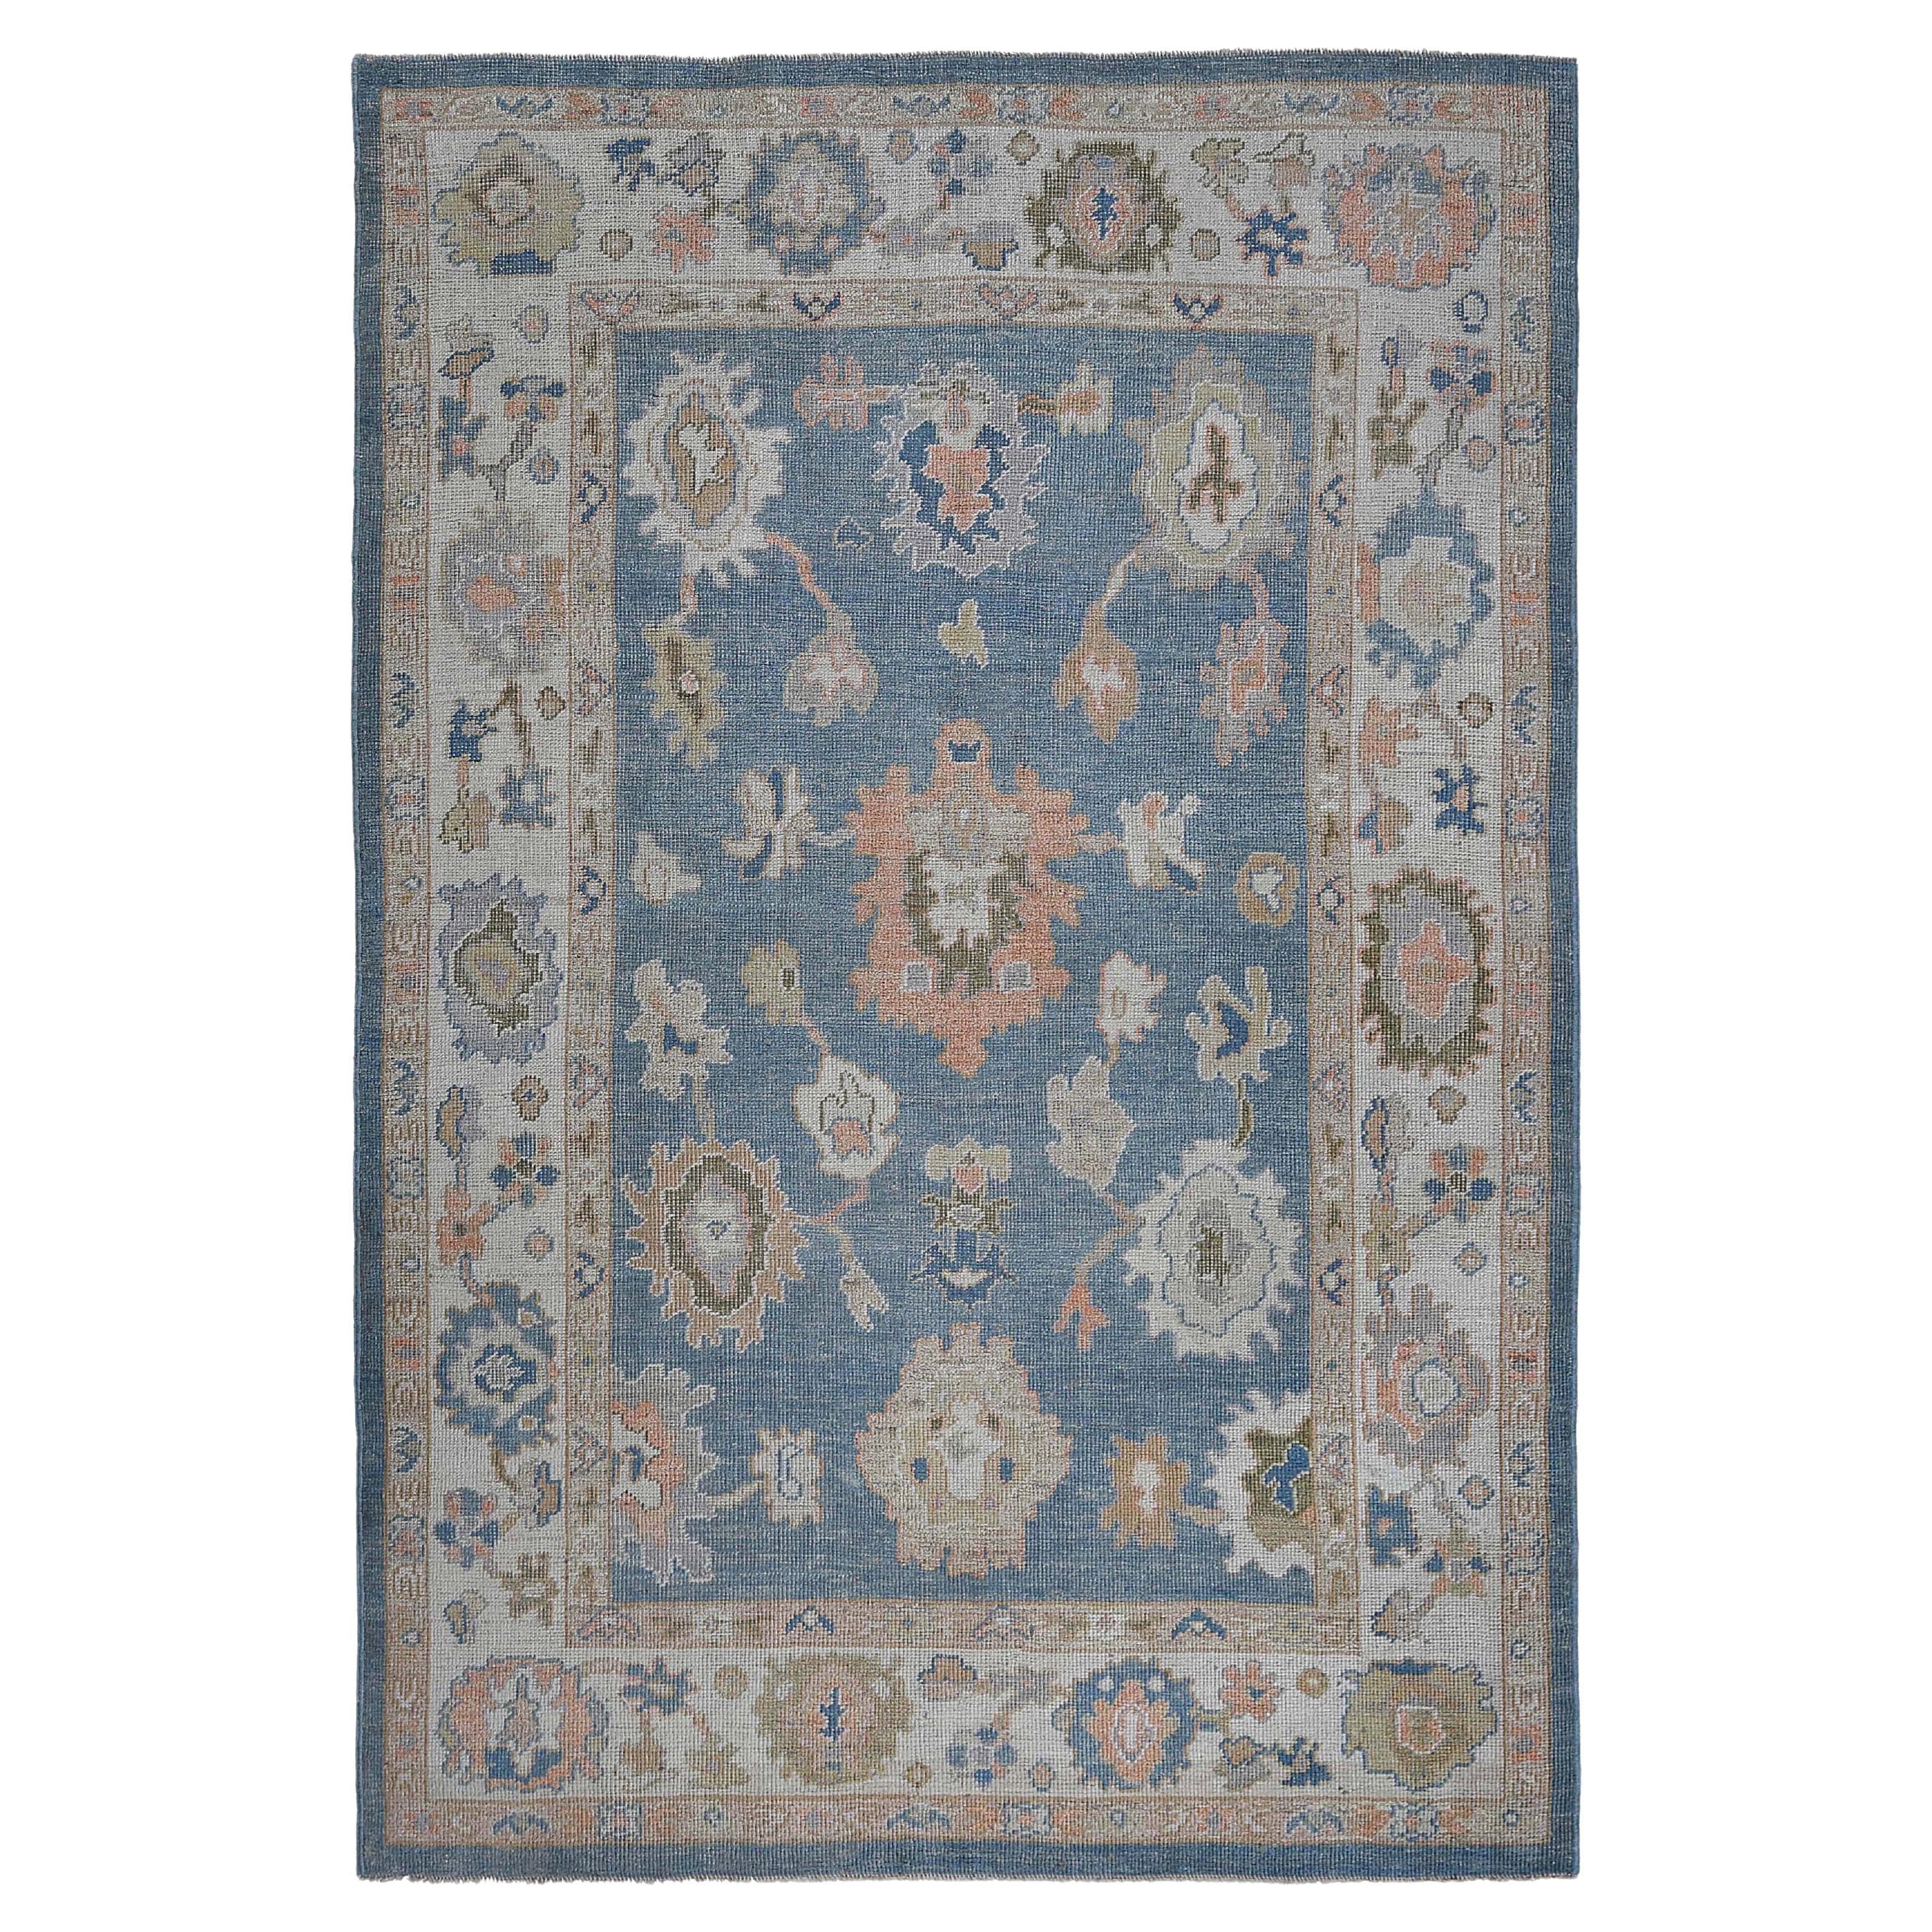 Turkish Oushak Rug with Coral Tones